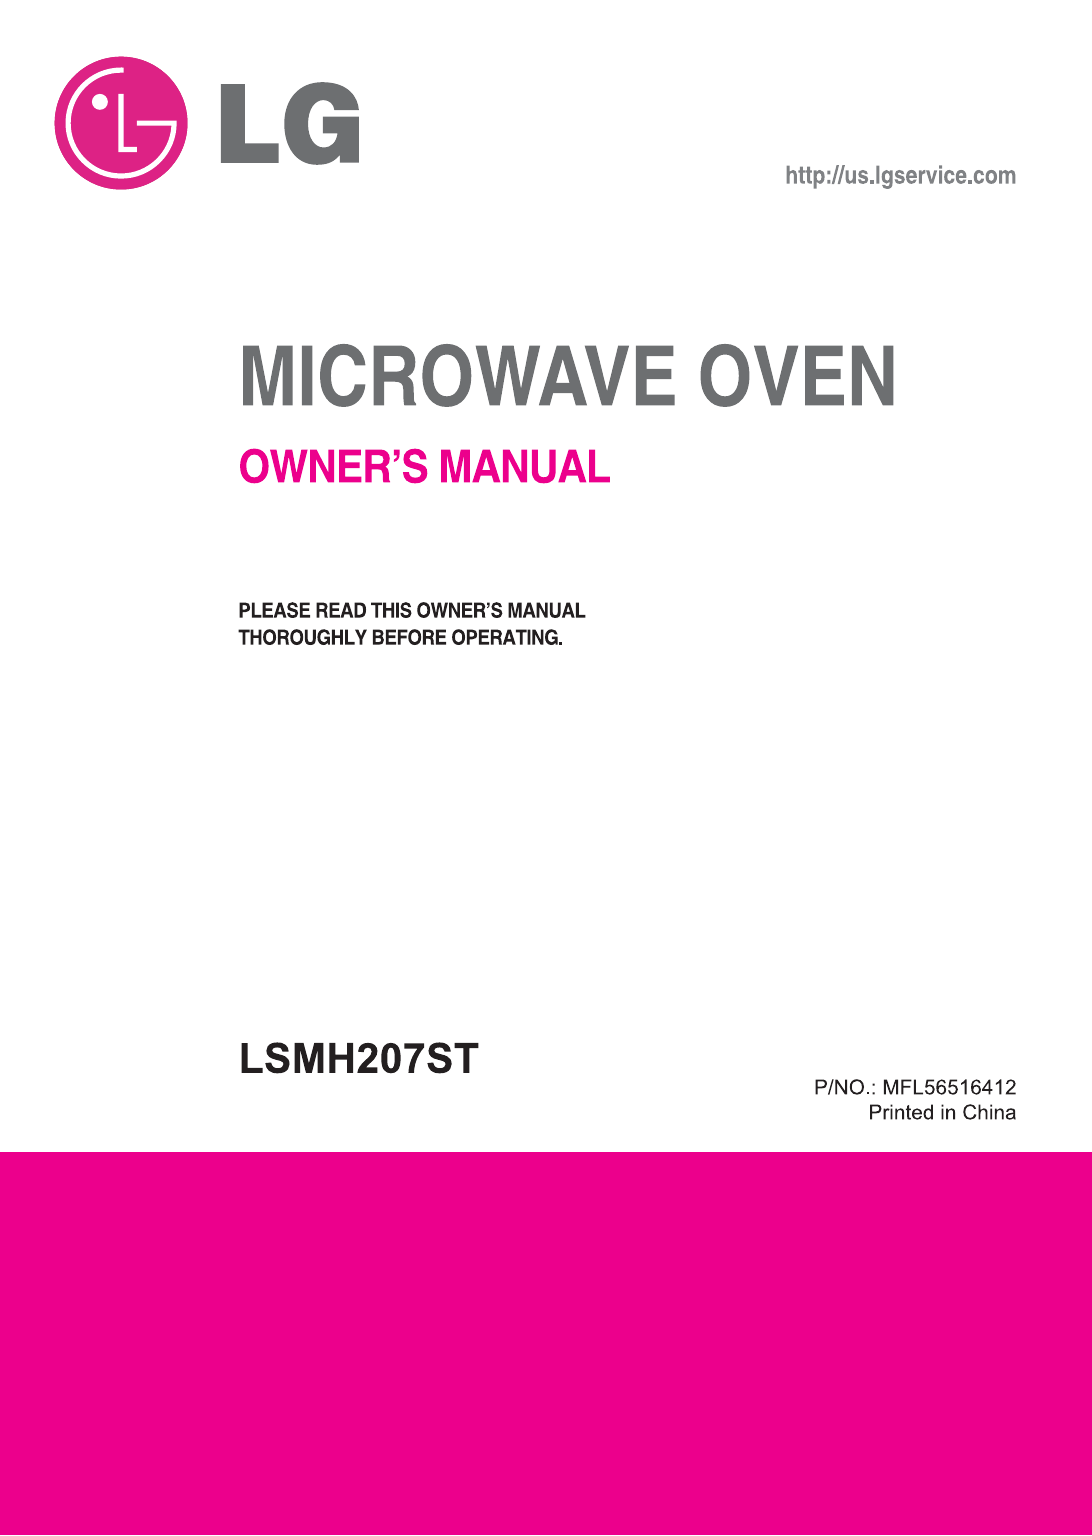 lg-lsmh207st-microwave-owner-s-manual-manualzz